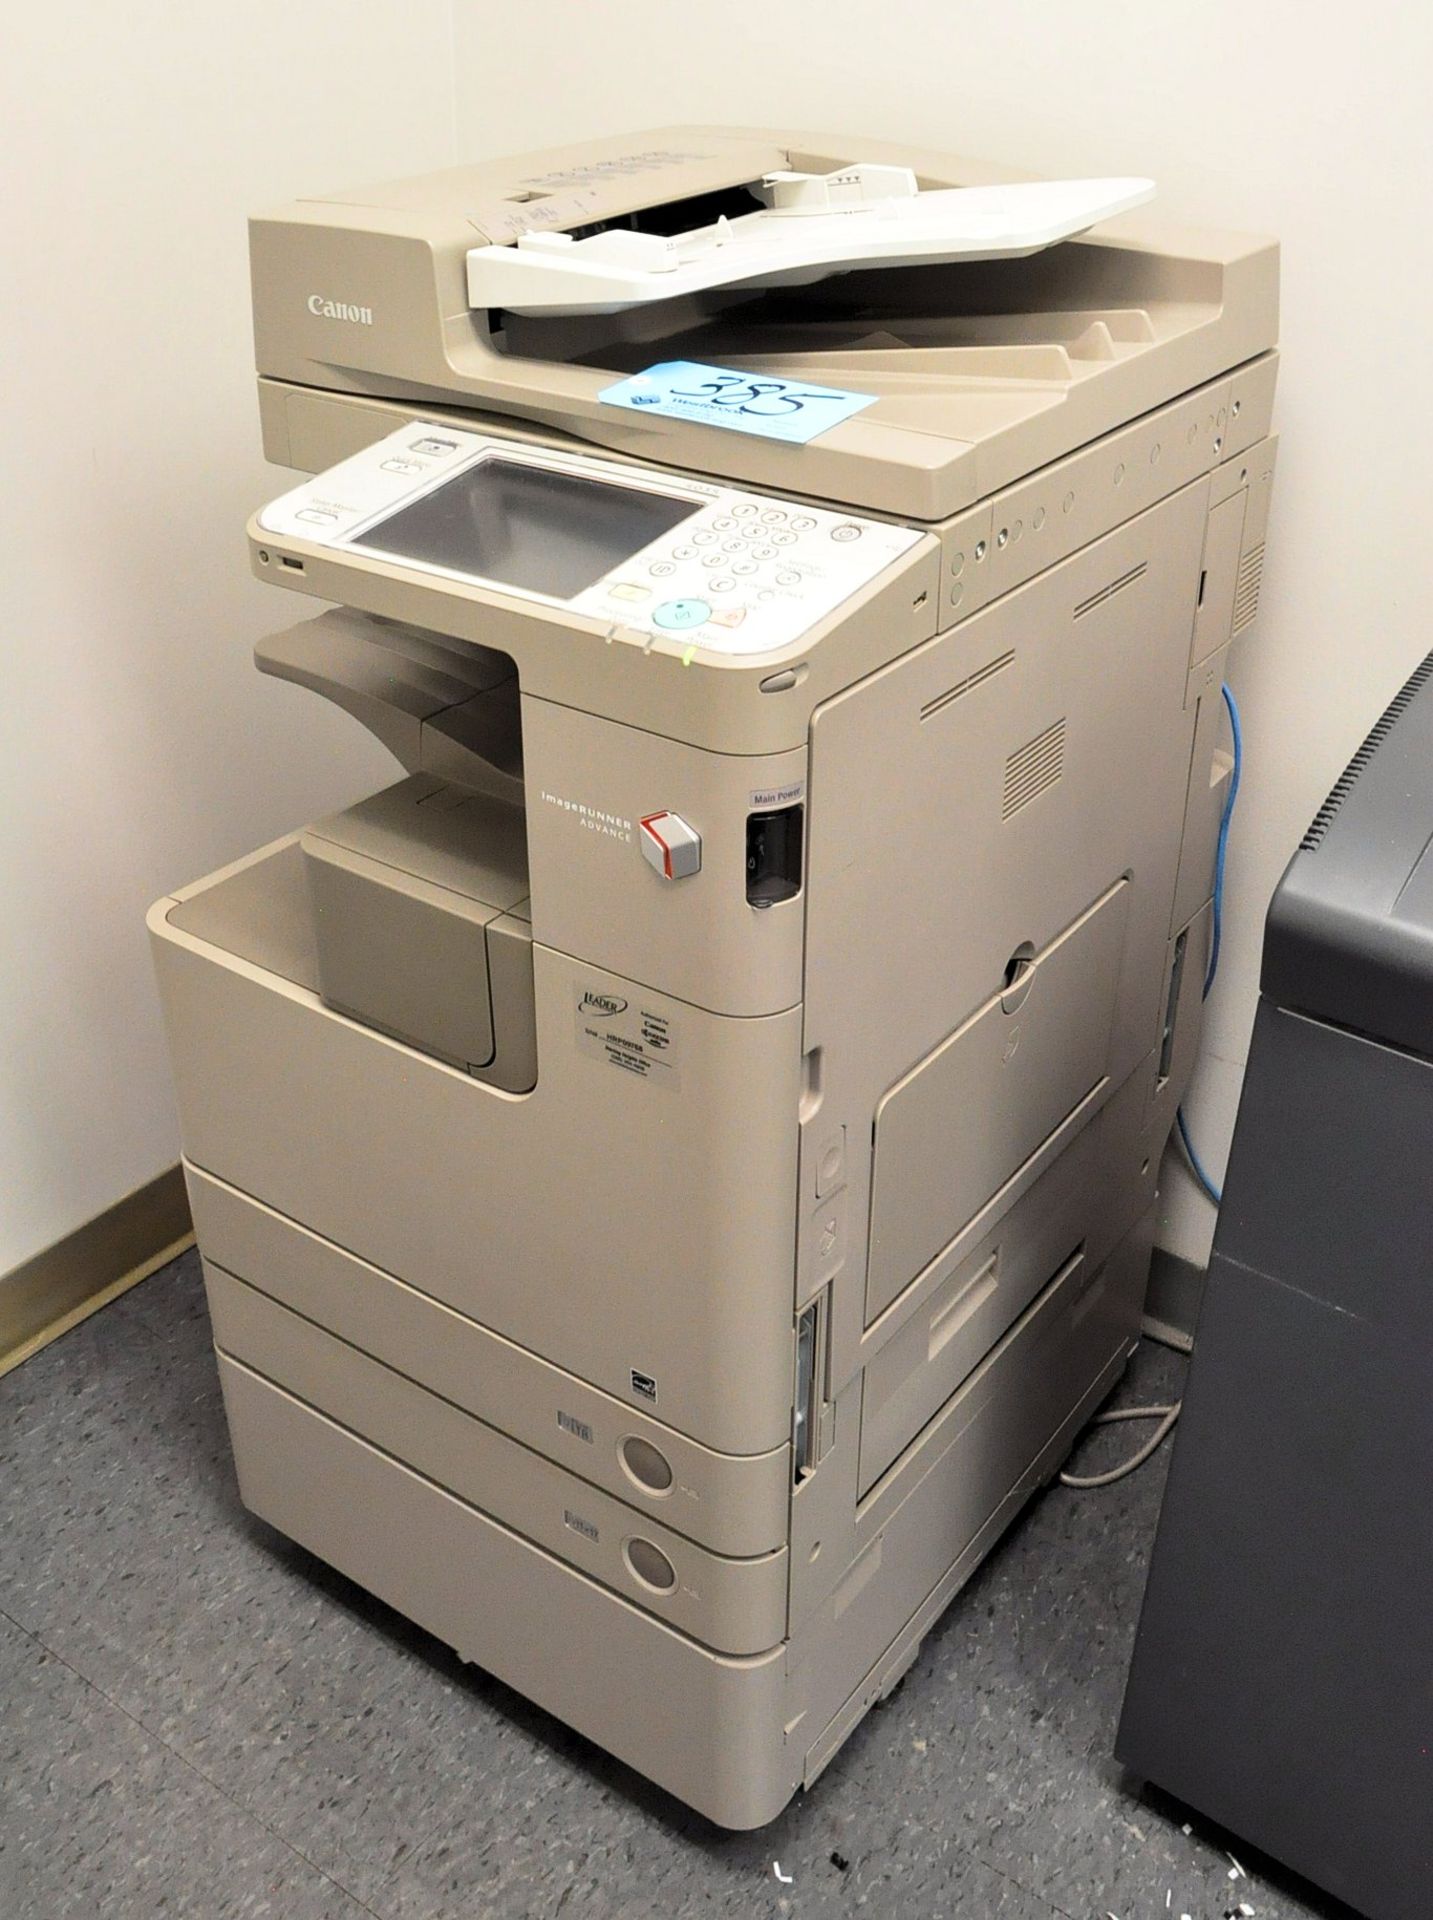 Canon 4035 Image Runner Multifunction Imaging System w/ Color Copy, B & W Print, Scan, Send, Store - Image 2 of 4